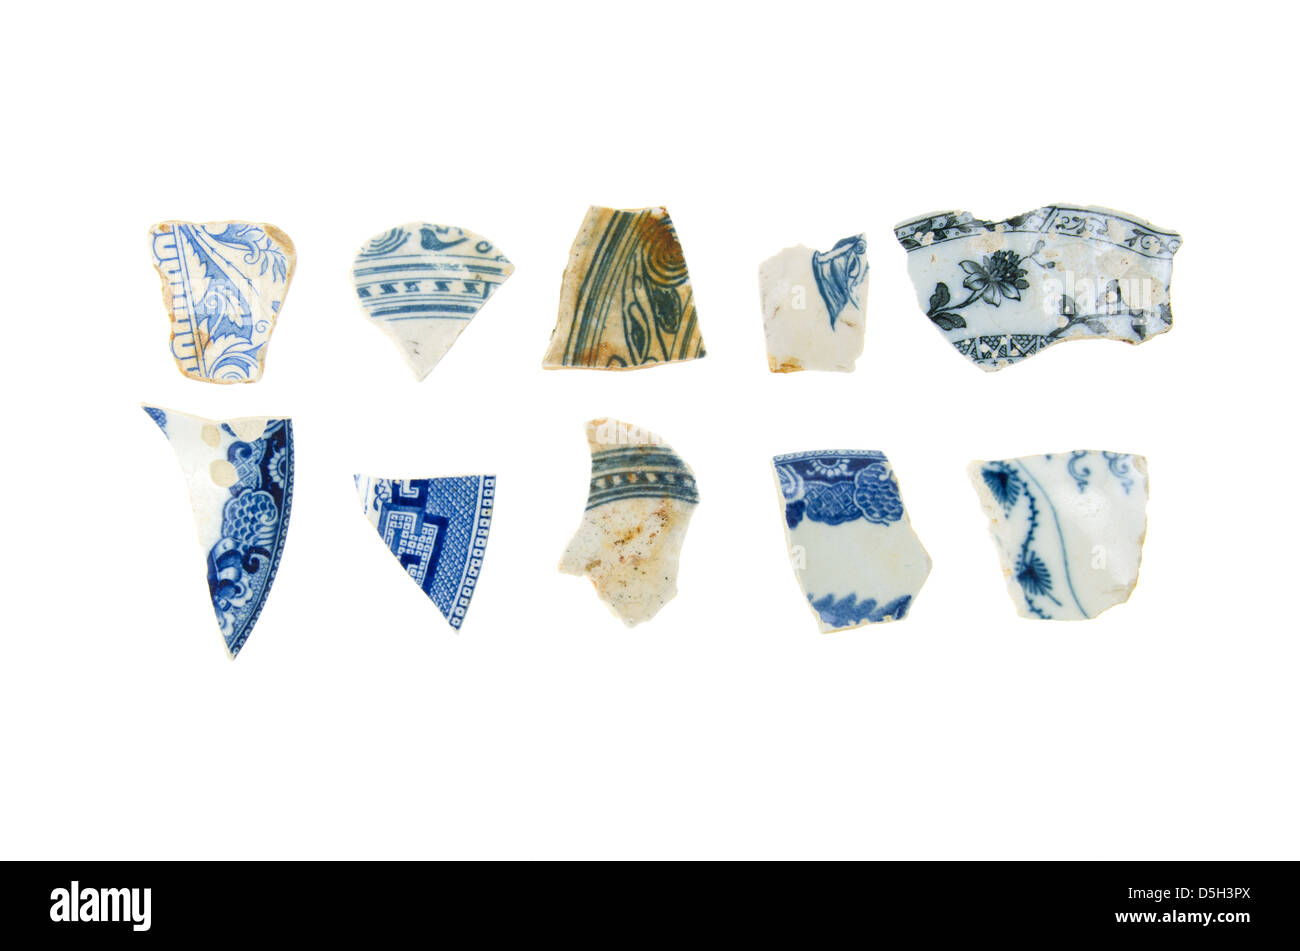 Ten pieces of blue-and-white sea china on white background. Stock Photo